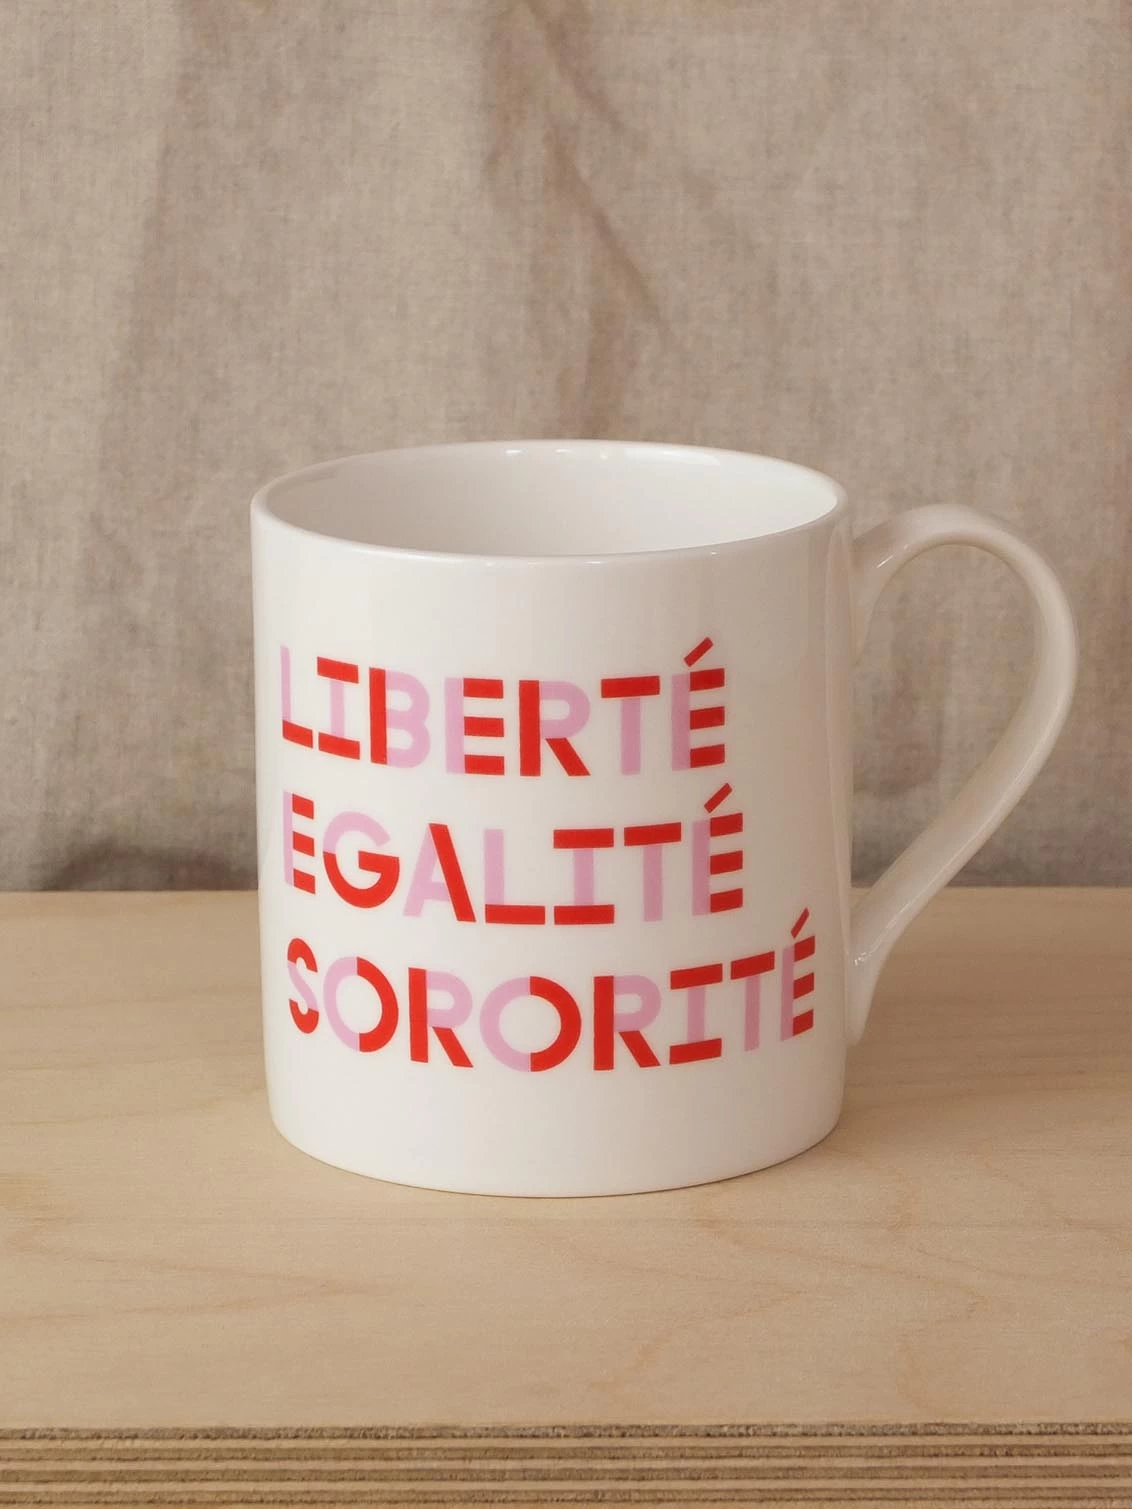 Black & Beech white mug with Liberte Egalite Sororite written on both sides in Pink and Red 